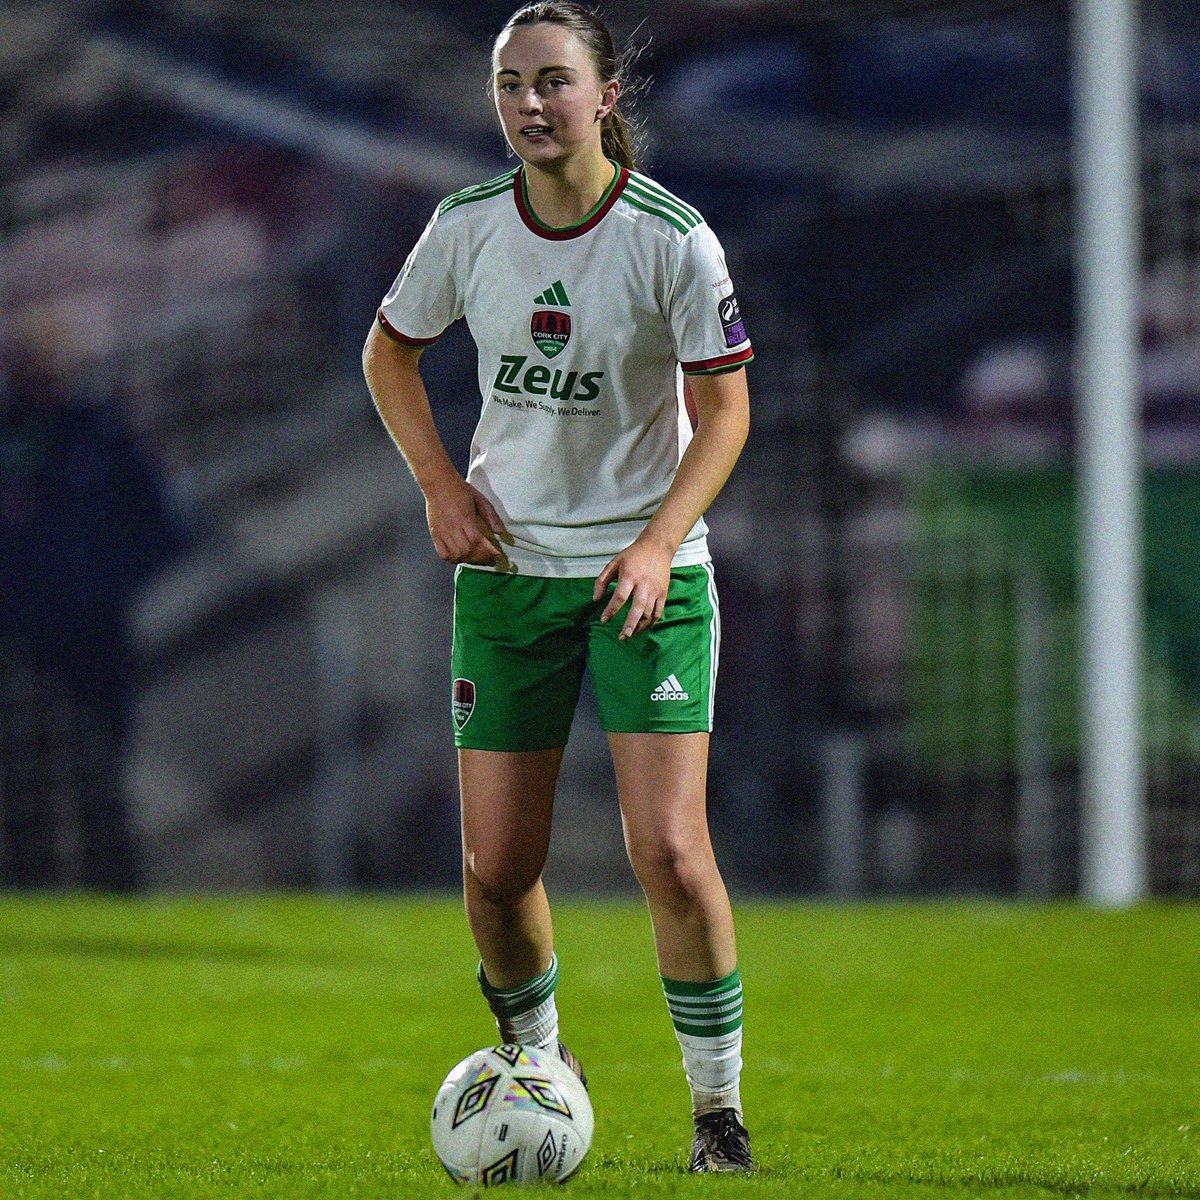 Congratulations to City's Orlaith O'Mahony & Heidi Mackin, who have been included in the #IRLWU19 squad for the upcoming training camp at the FAI National Training Centre! 🇮🇪 #CCFC84 || #WLOI